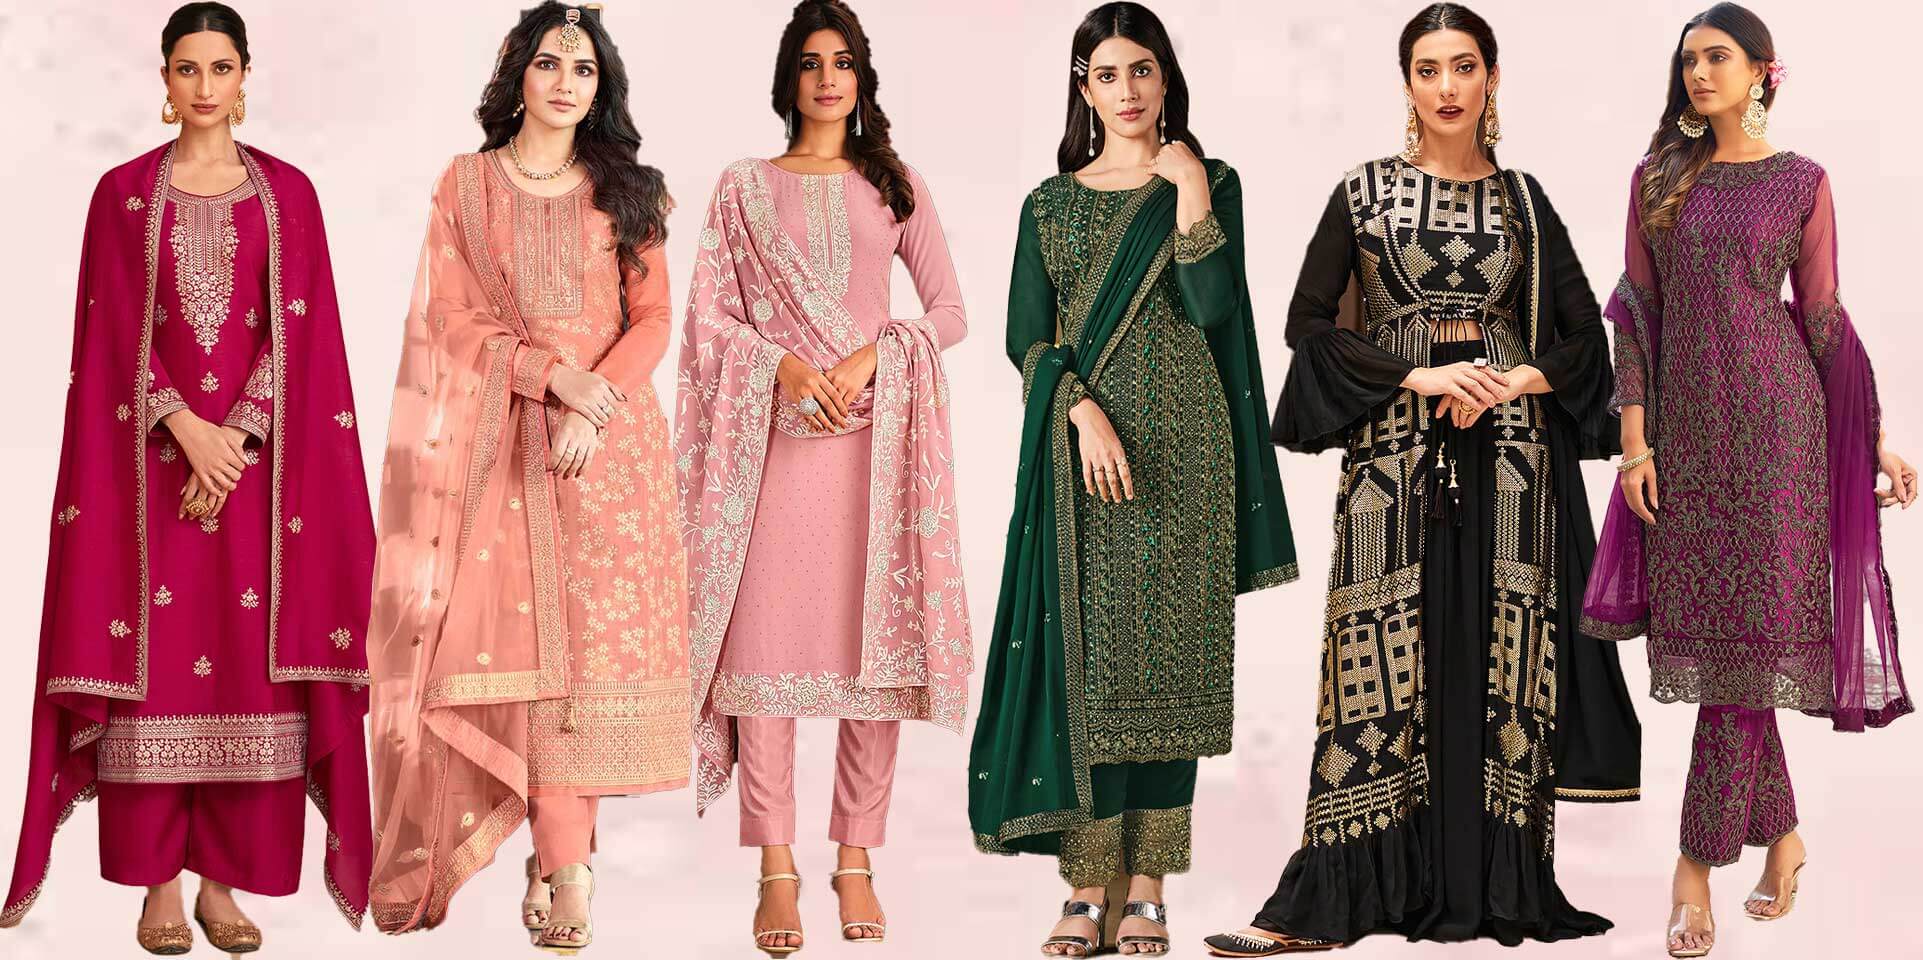 What is the Latest Fashion in Salwar Kameez?